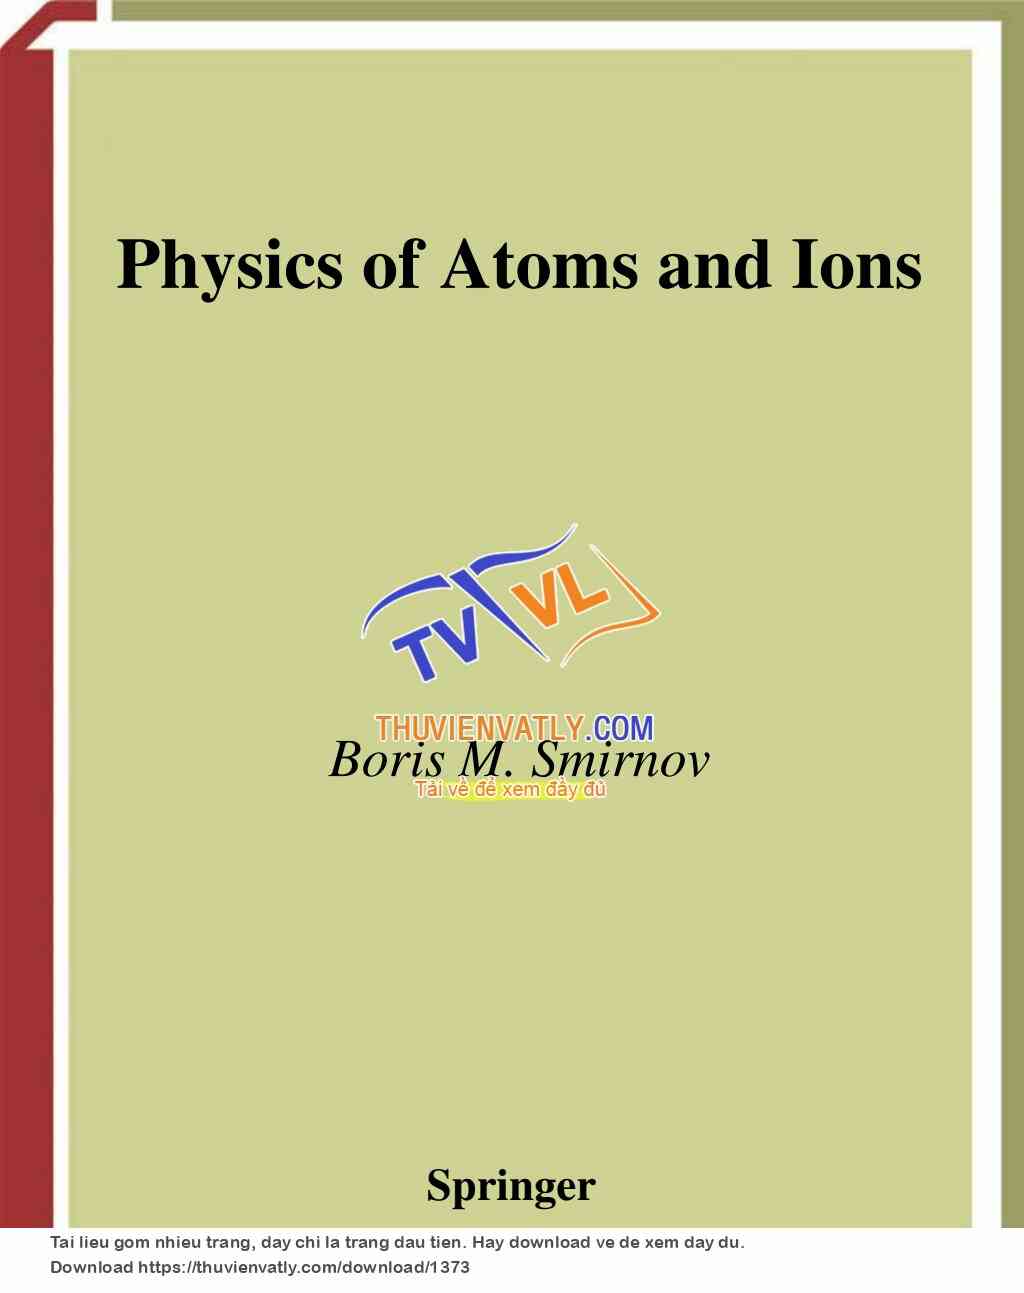 Physics of Atoms and Ions, Smirnov, Springer 2003